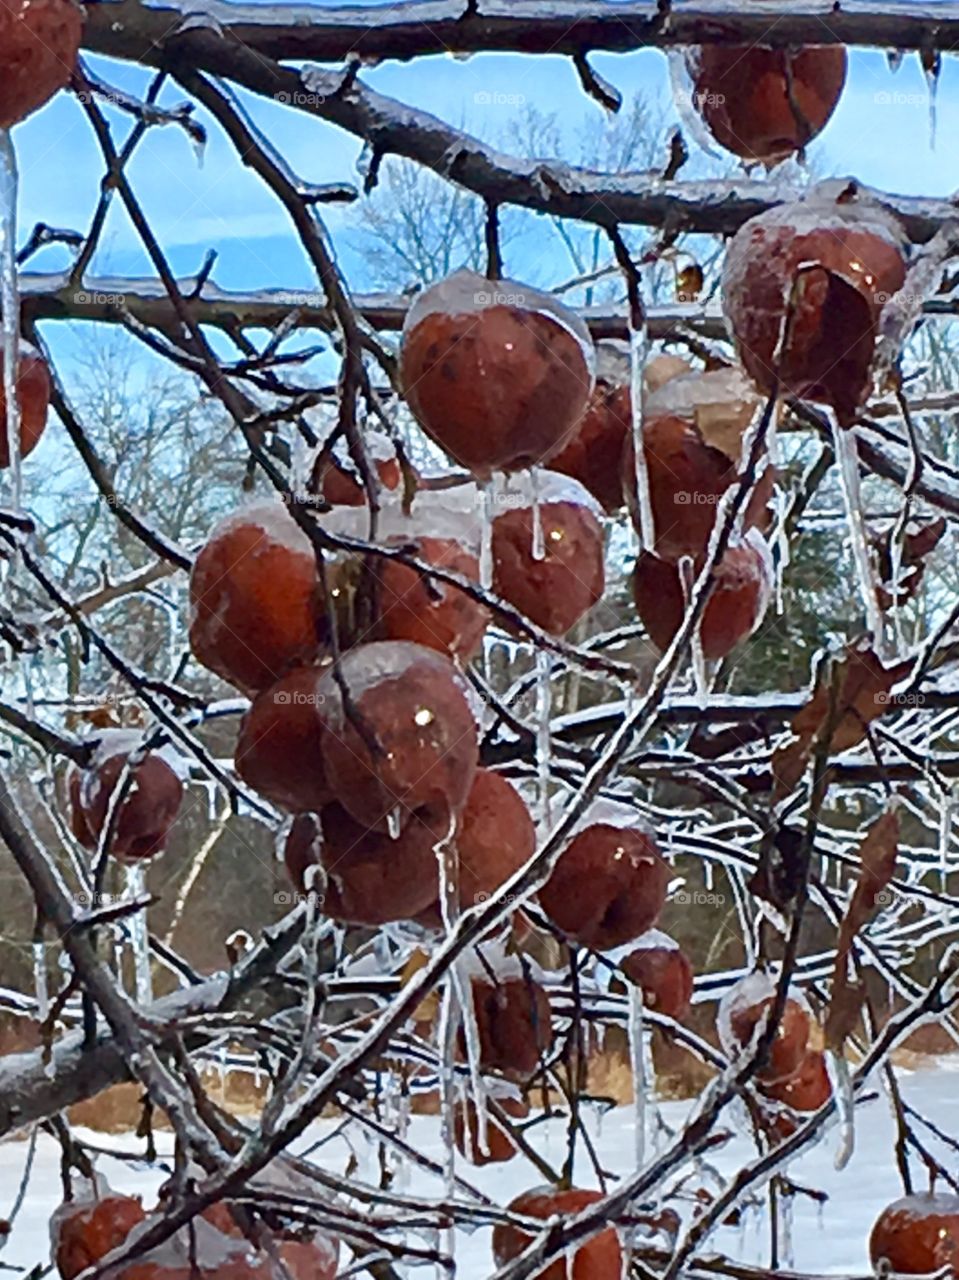 Frozen apples, January in Maine 